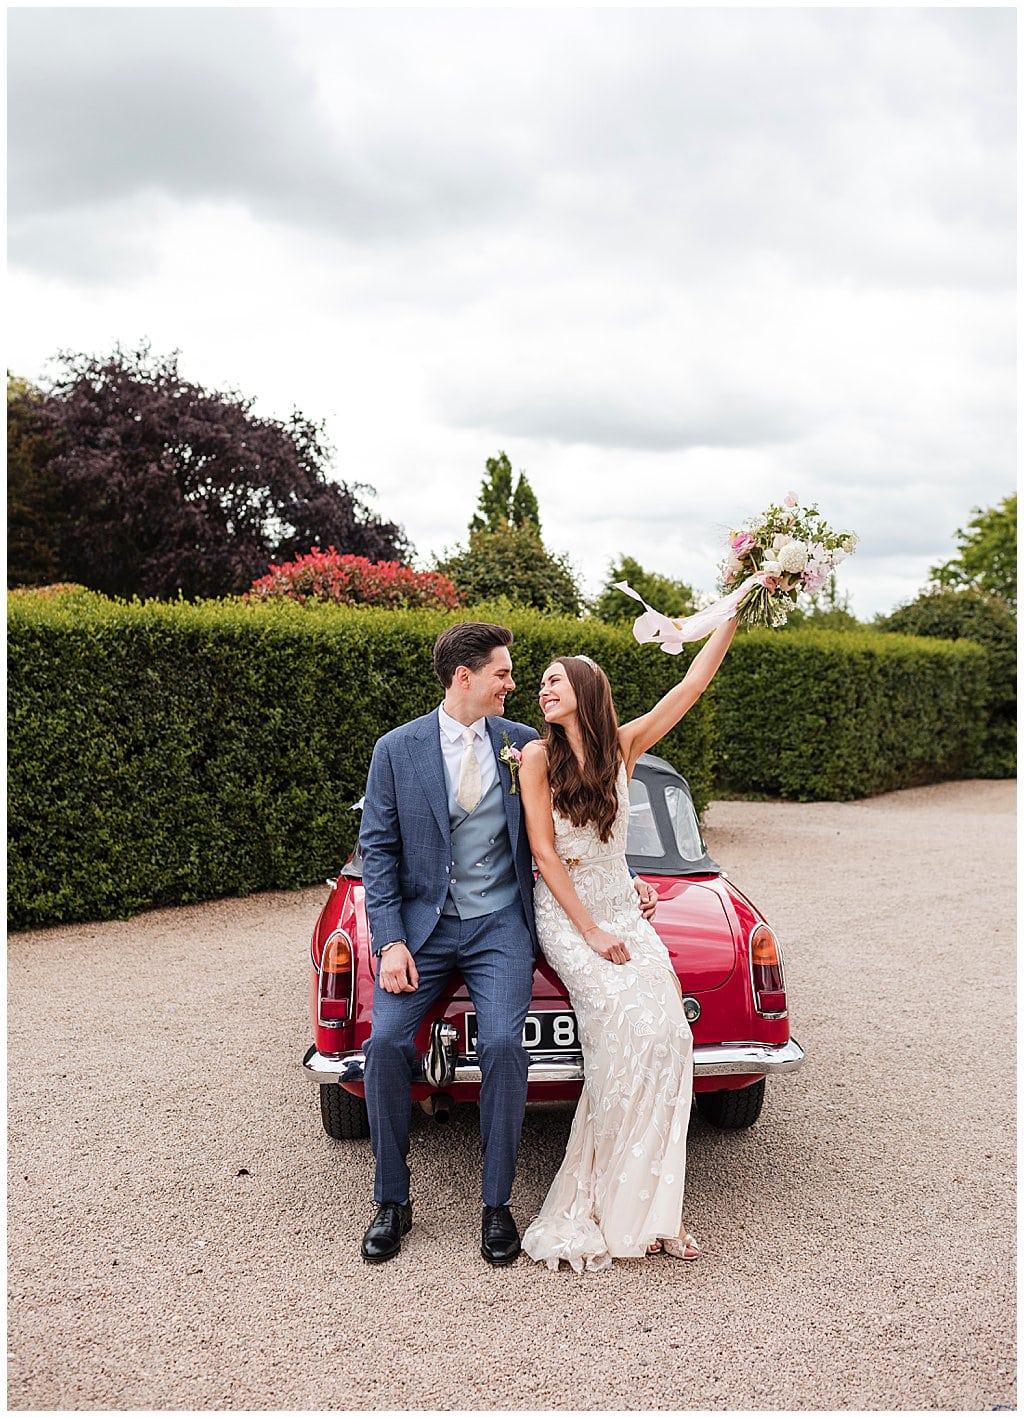 Bride and Groom looking at each other smiling, sitting on the back of a red sports car